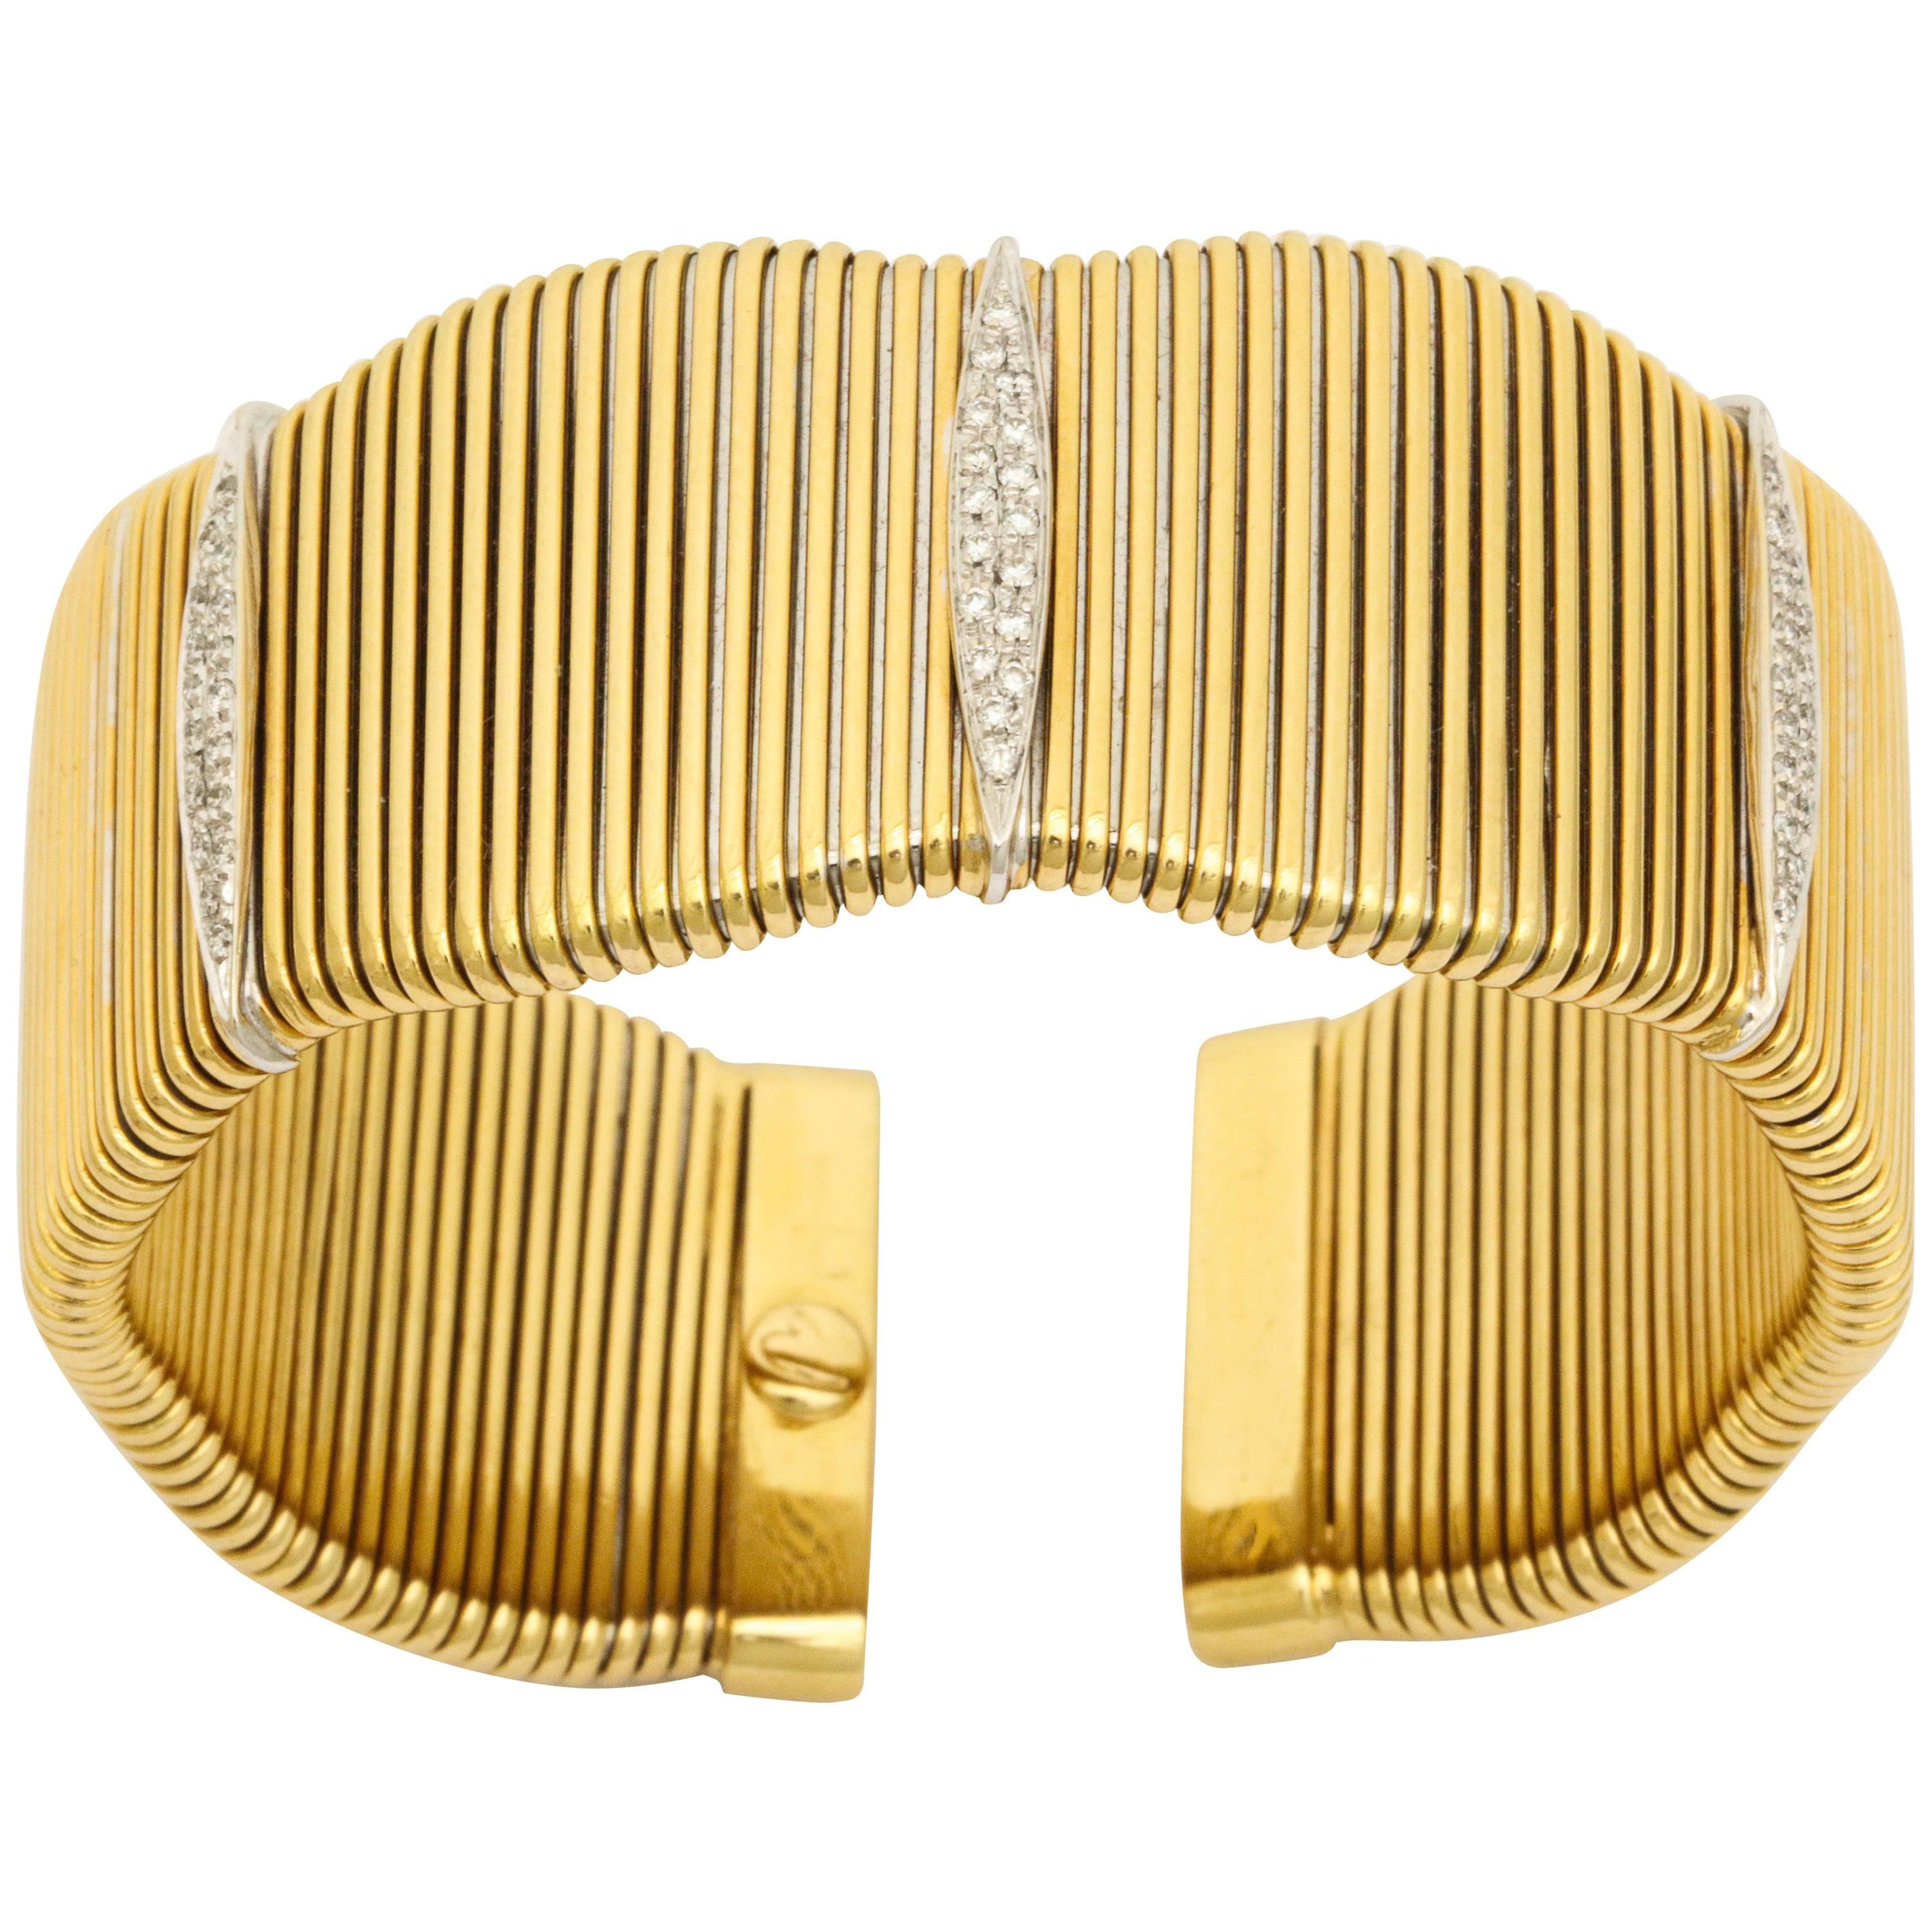 A wonderful modernist French gold cuff. A flexible body in 18kt gold with white gold and diamond cameos. 